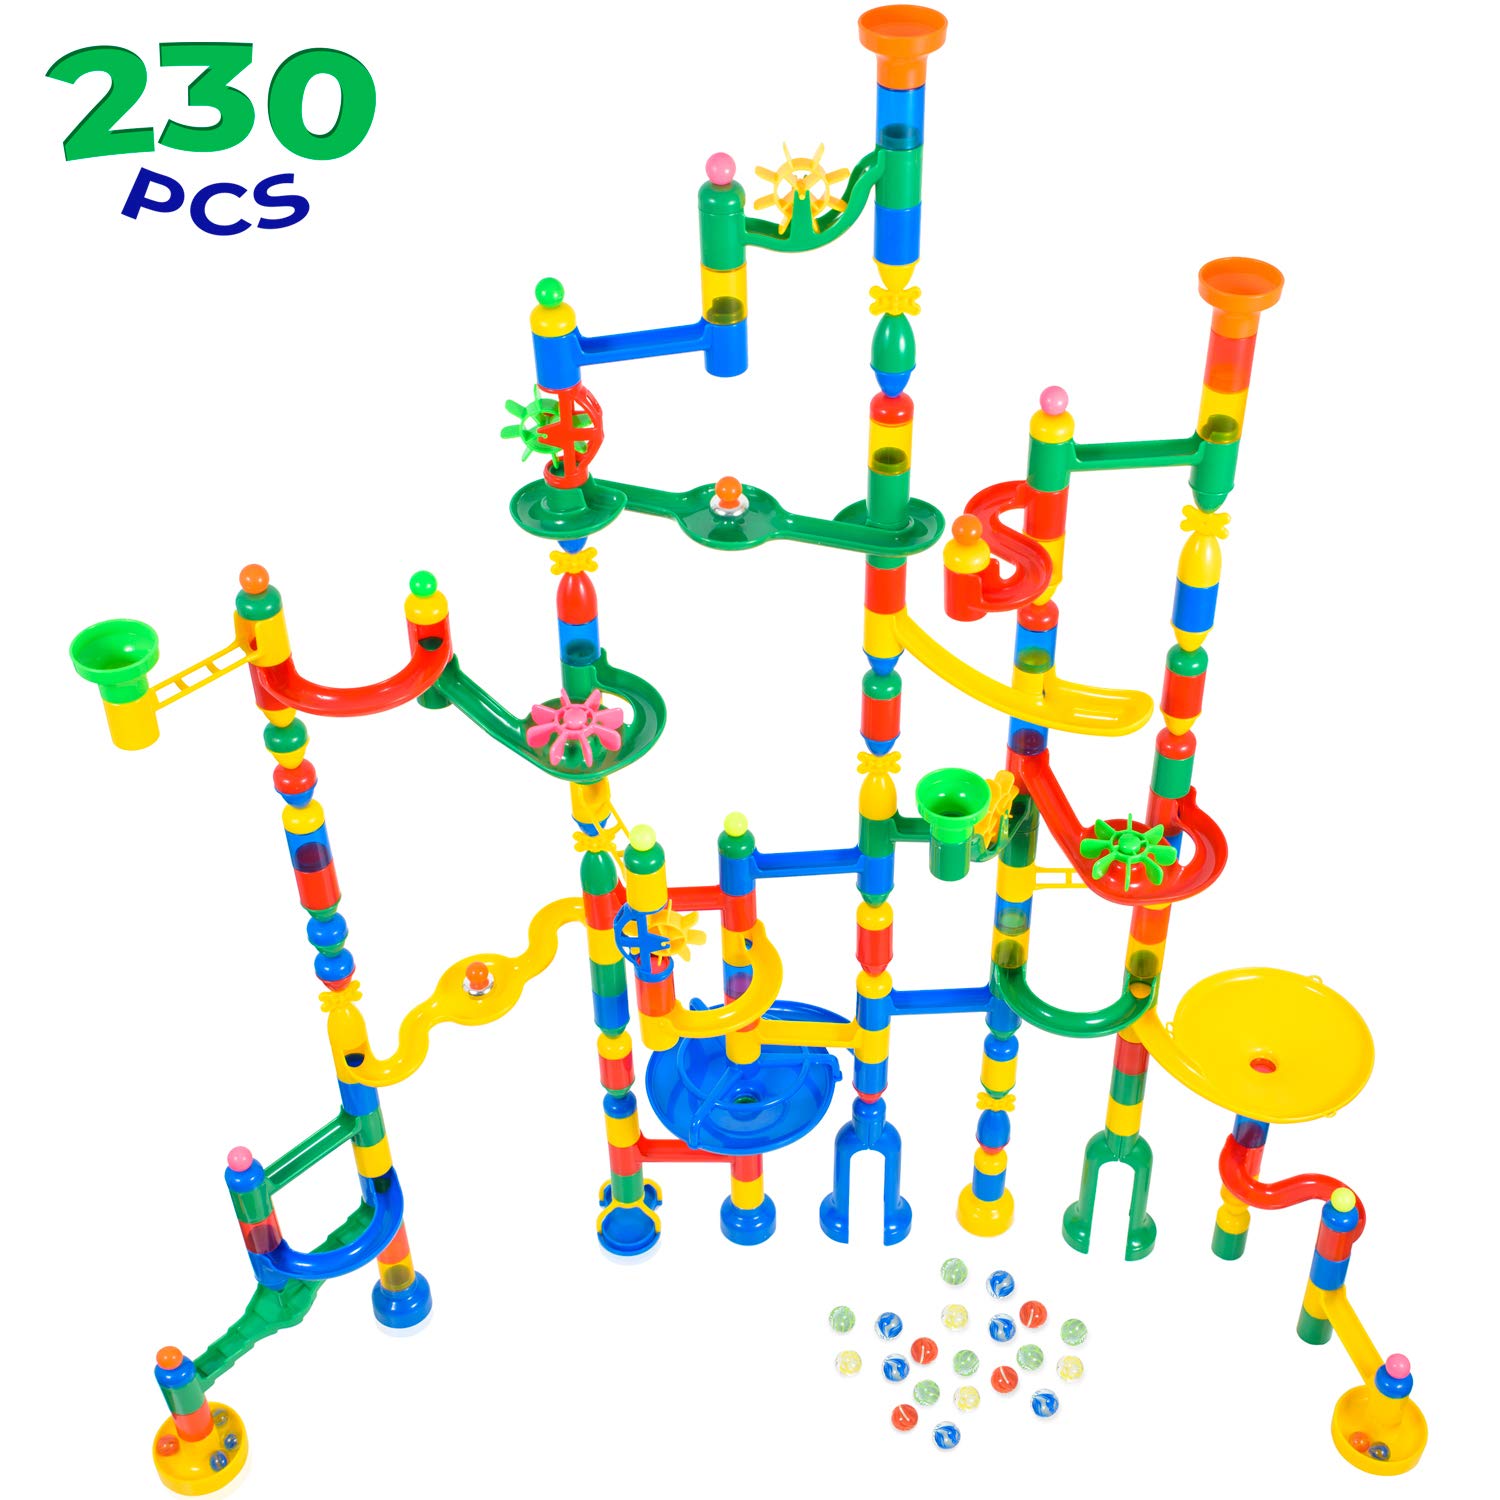 MagicJourney Giant Marble Run Toy Track Super Set Game I 230 Piece Marble Maze Building Sets w/ 200 Colorful Marble Tracks, 30 Marbles & 4 Challenge Levels for STEM Learning, Endless Educational Fun